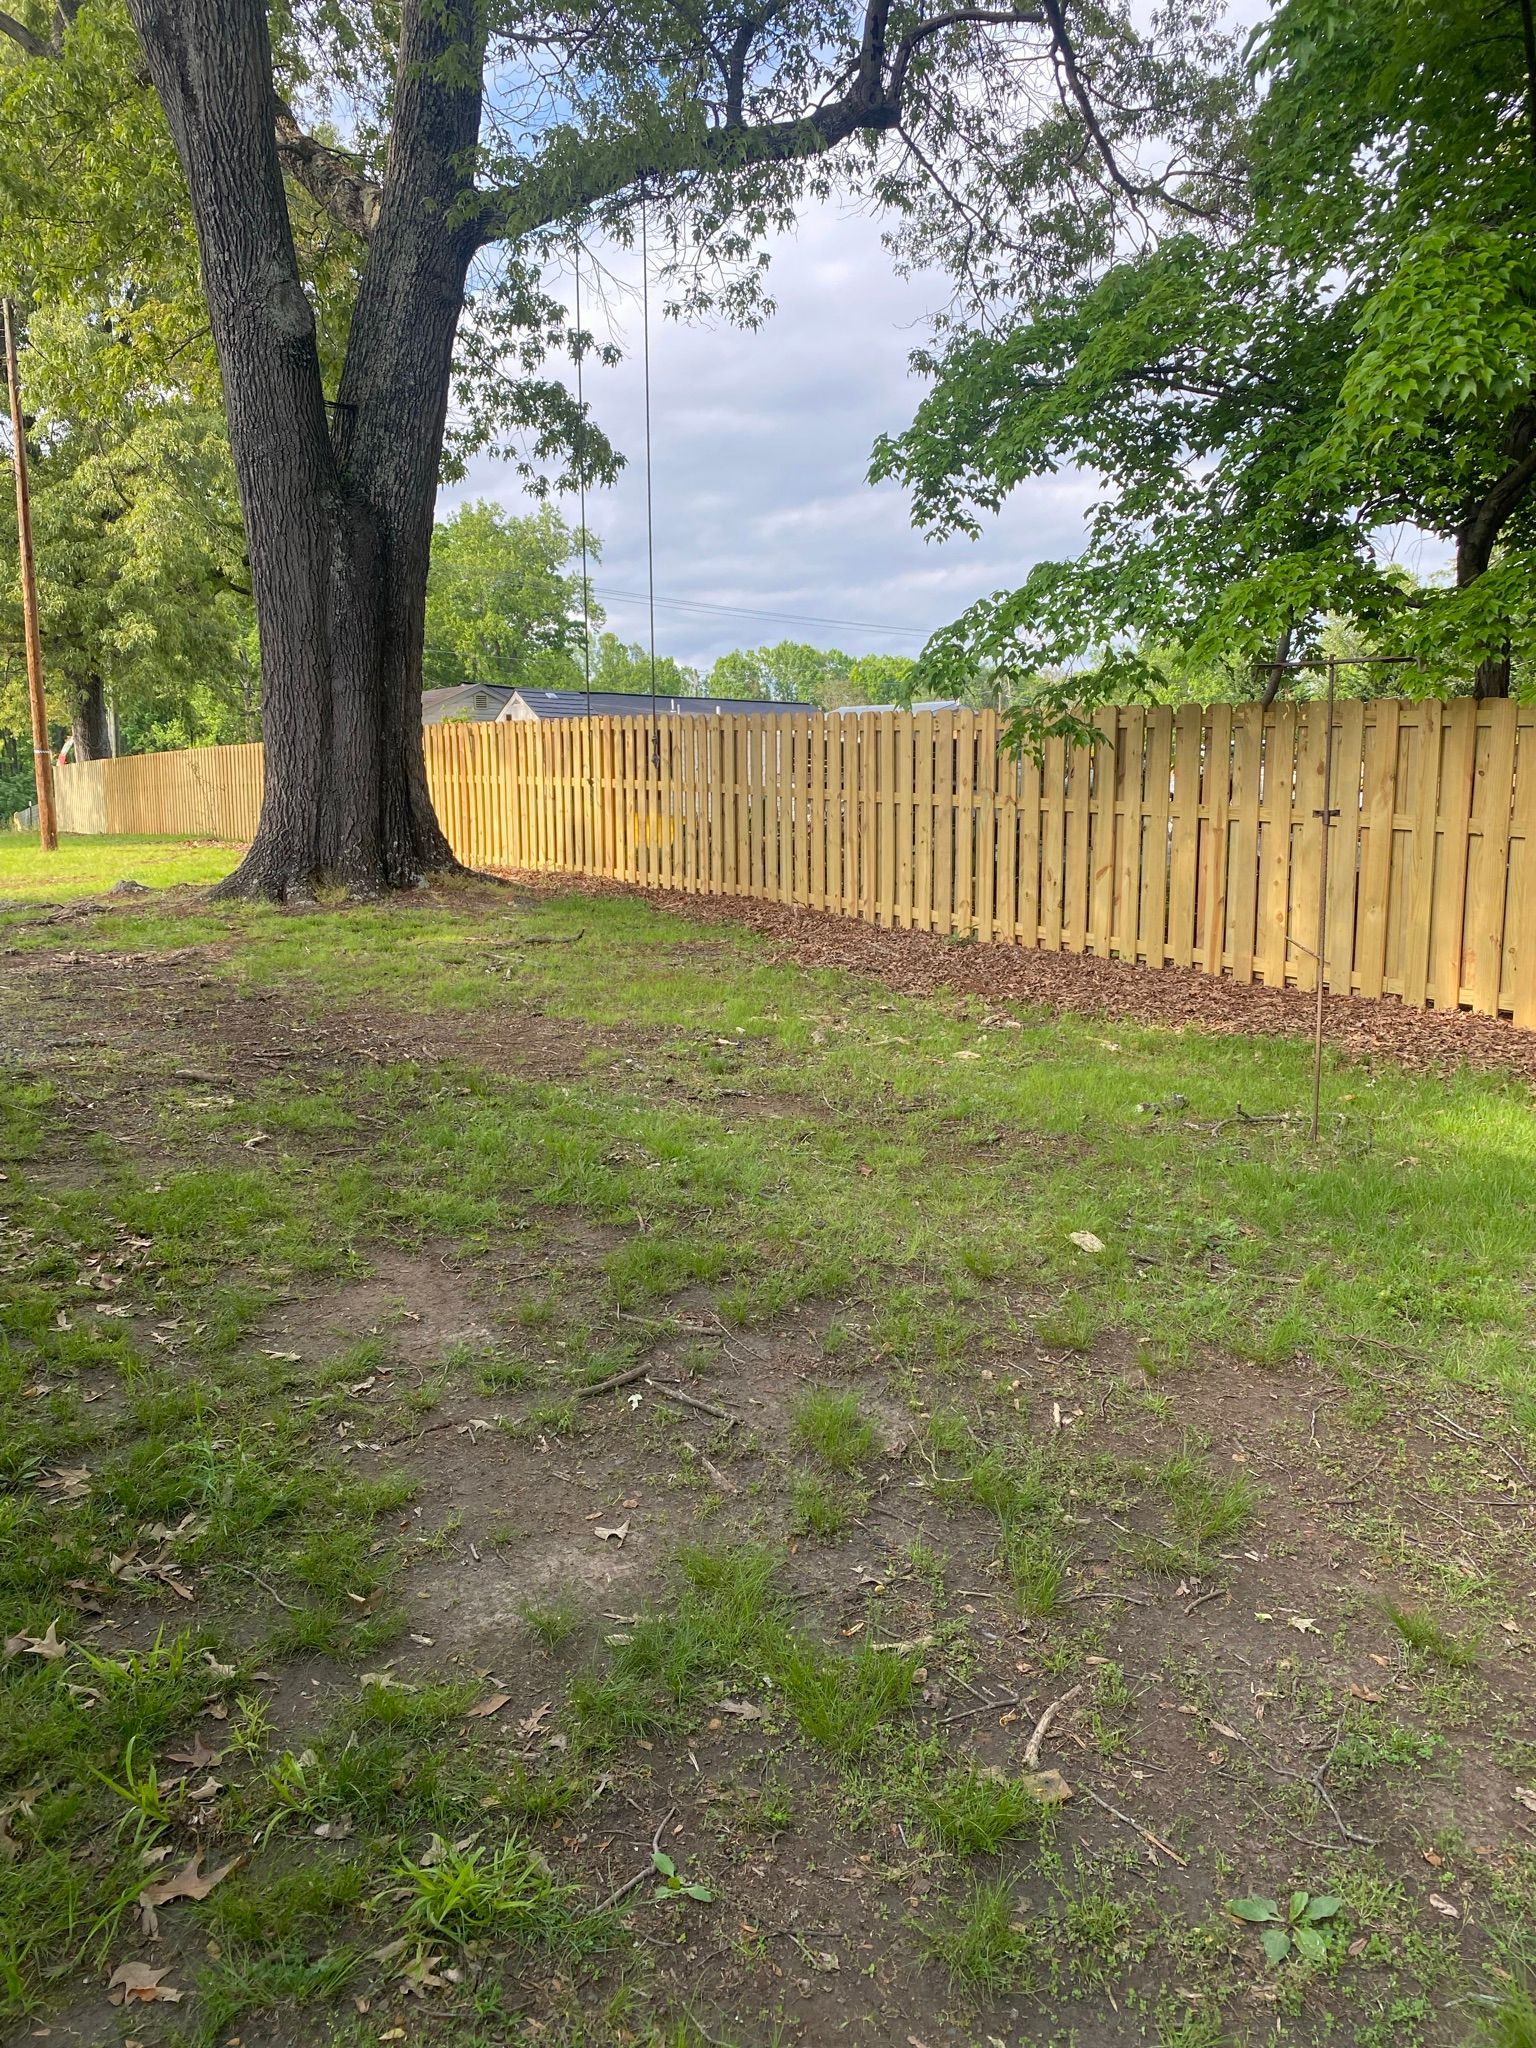 a wooden fence is surrounded by trees in a yard .